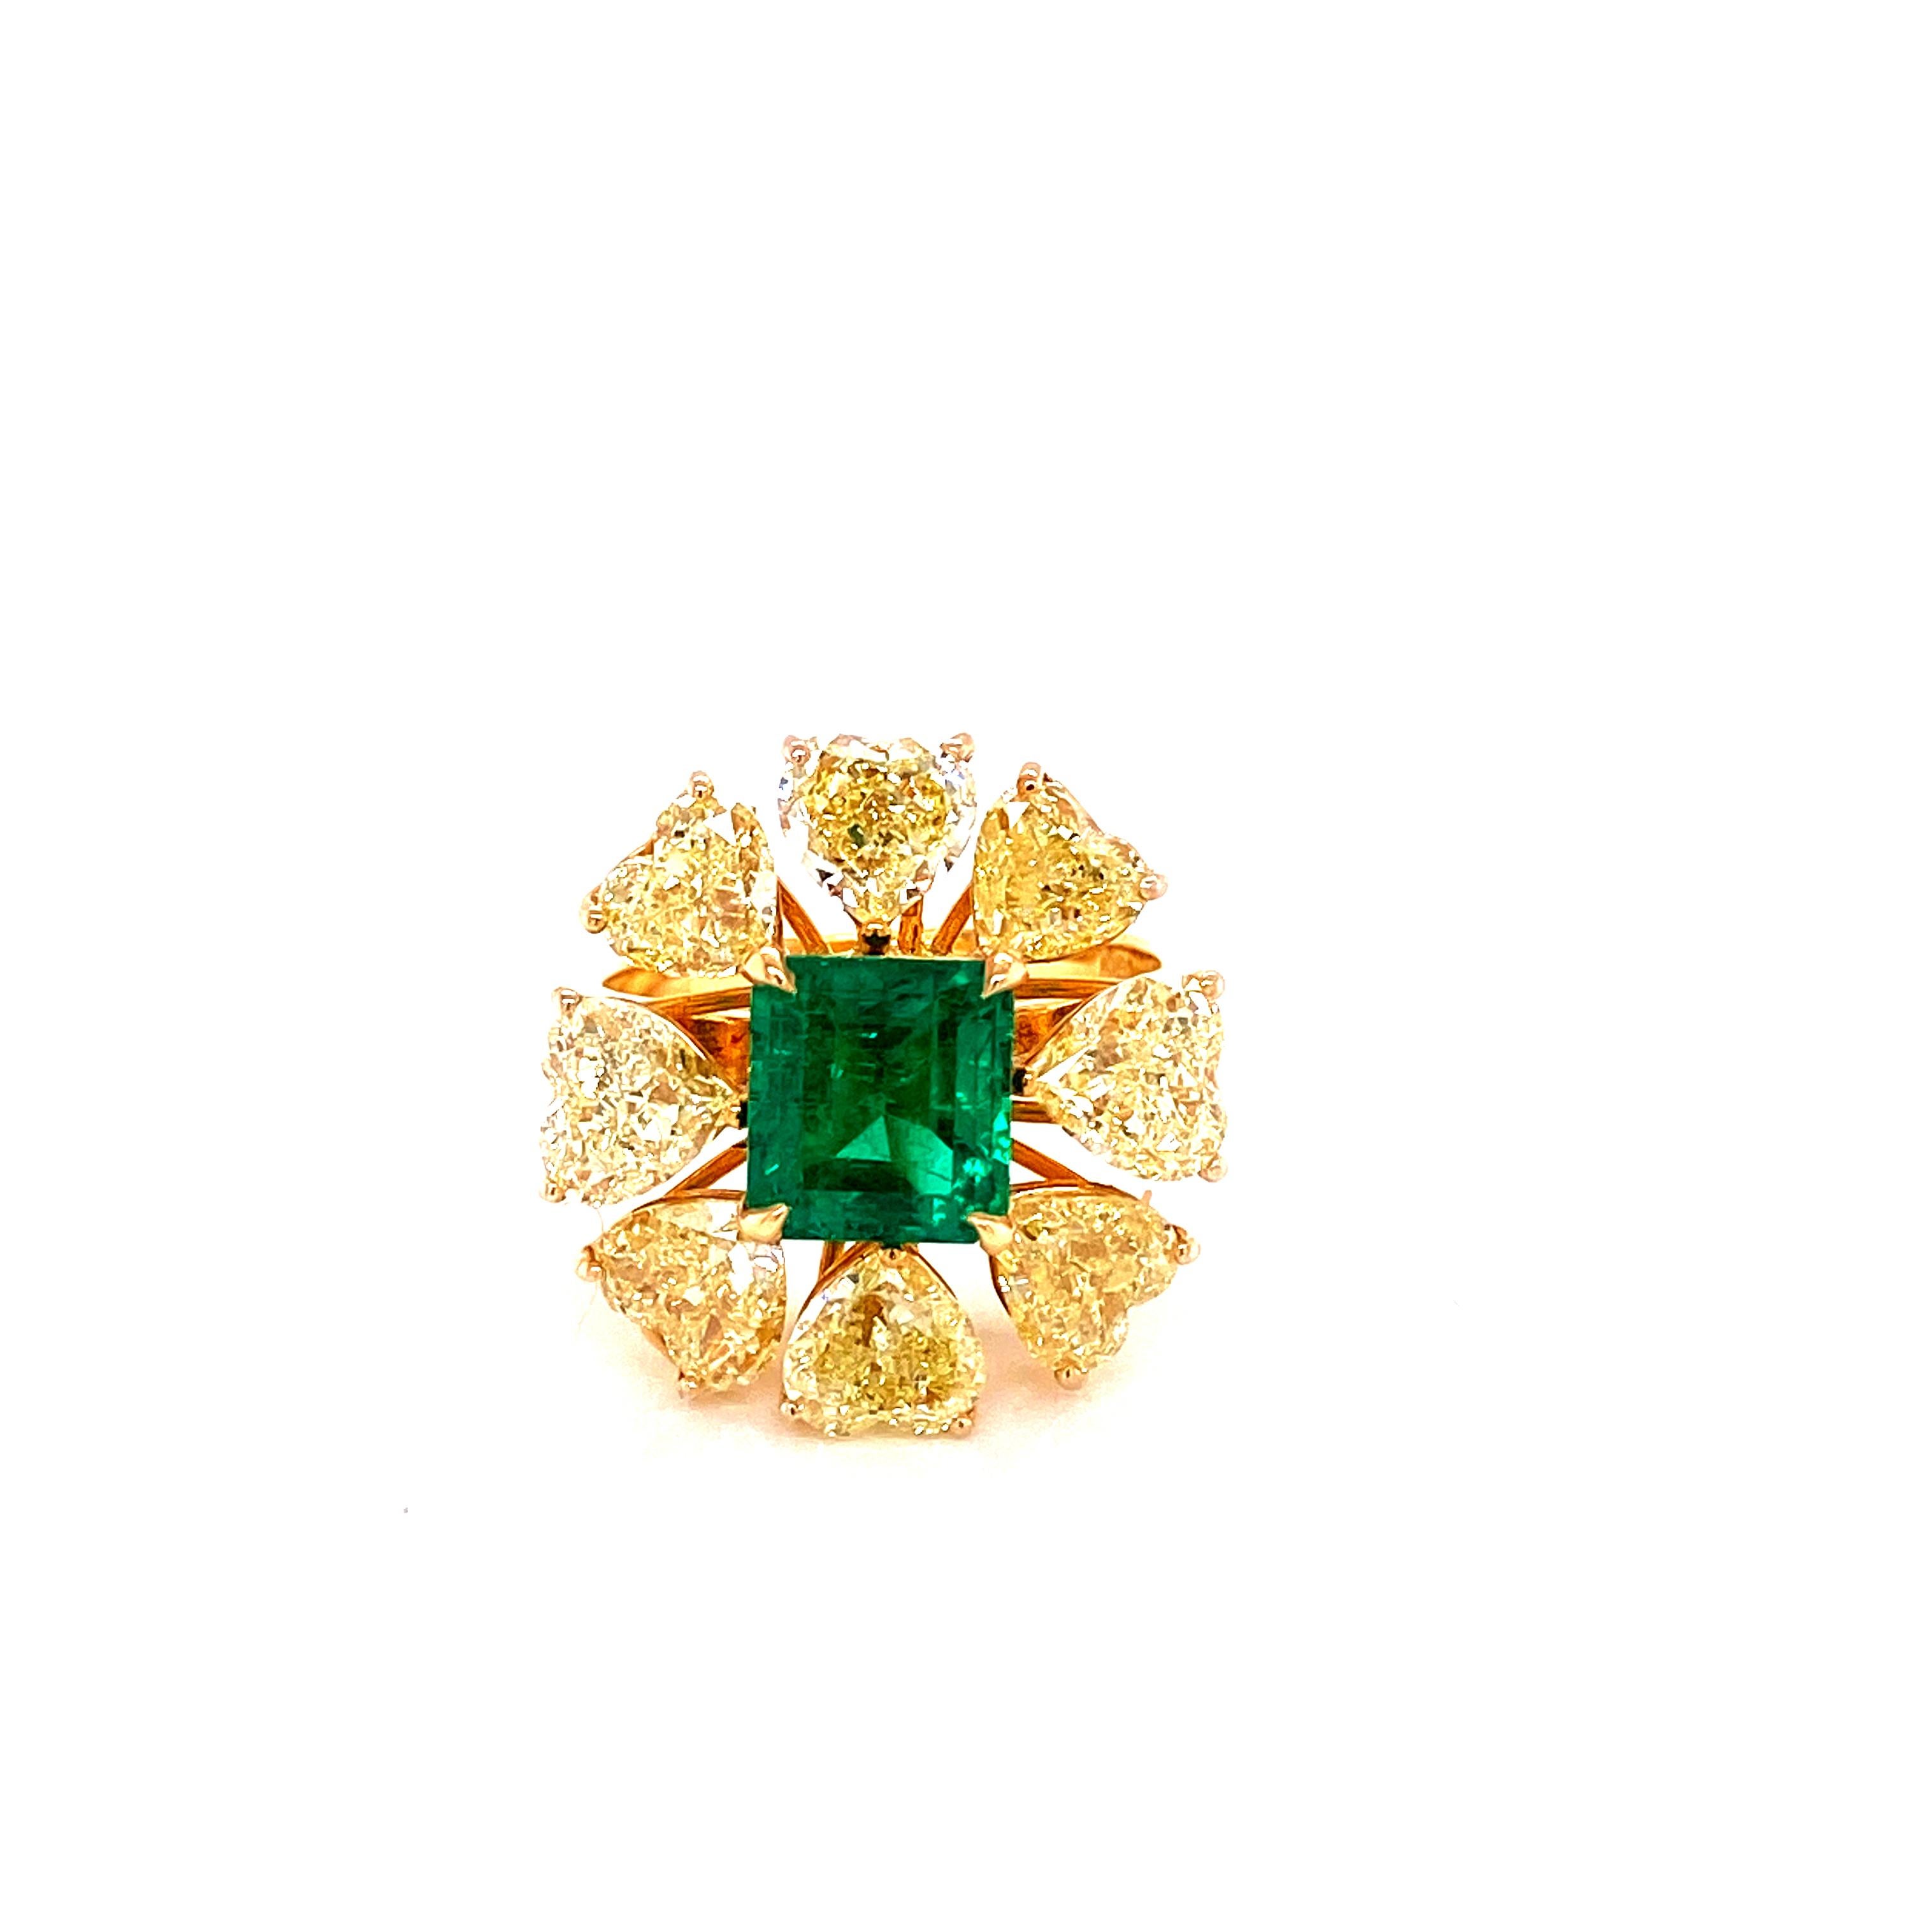 2.08 carat GRS Certified Vivid Green Colombian Emerald and Yellow Diamond Engagement Ring:

A beautiful ring, it features a rare vivid green Colombian emerald weighing 2.08 carat, accompanied by a GRS Lab certificate, along with a halo of intense